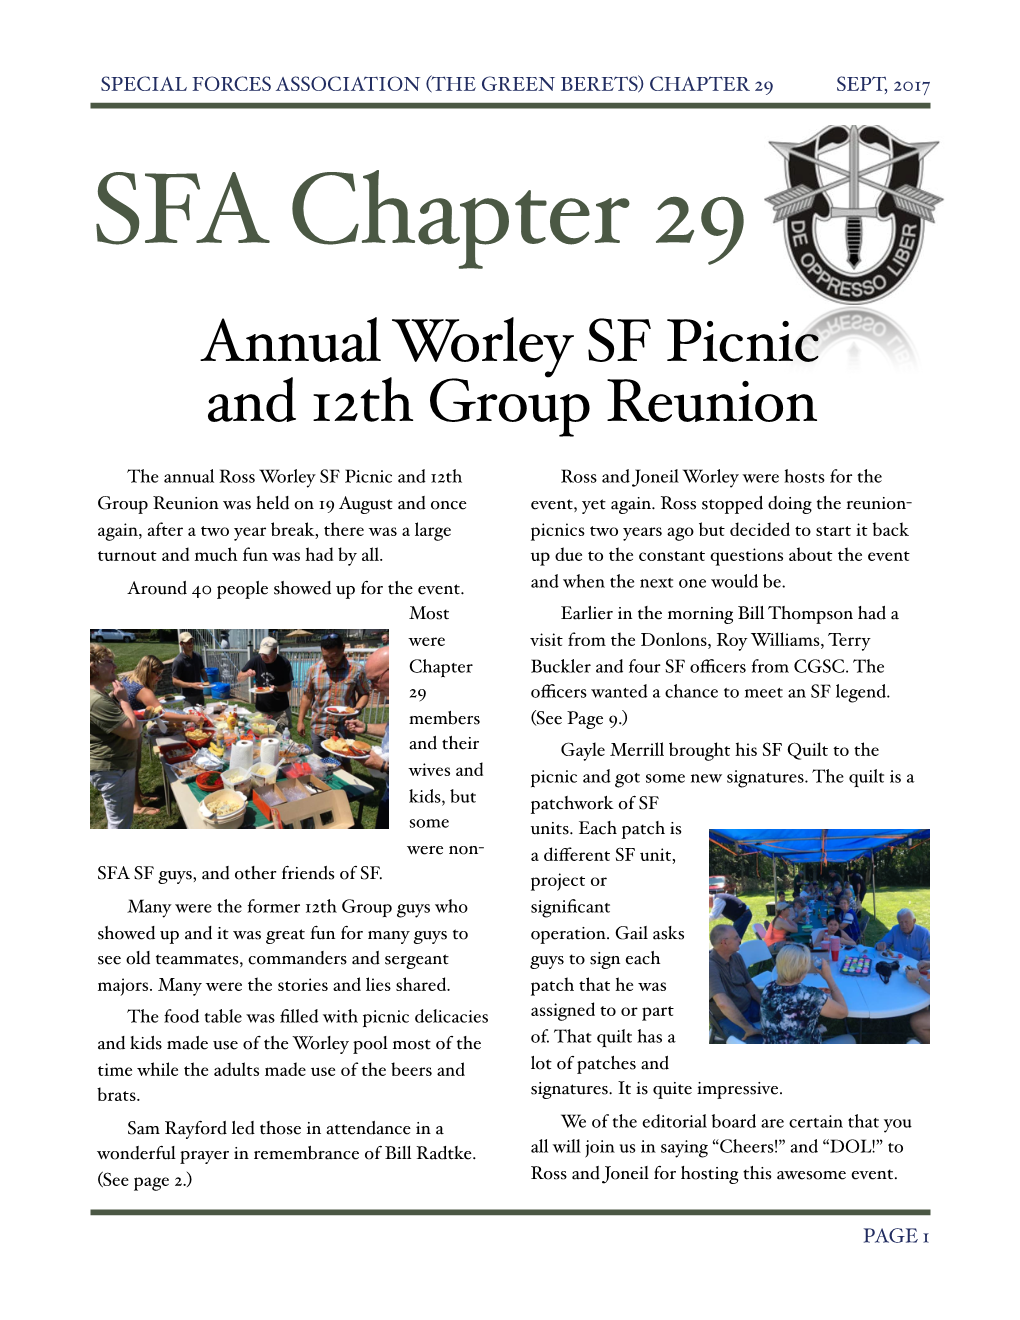 SEPT, 2017 SFA Chapter 29 Annual Worley SF Picnic and 12Th Group Reunion